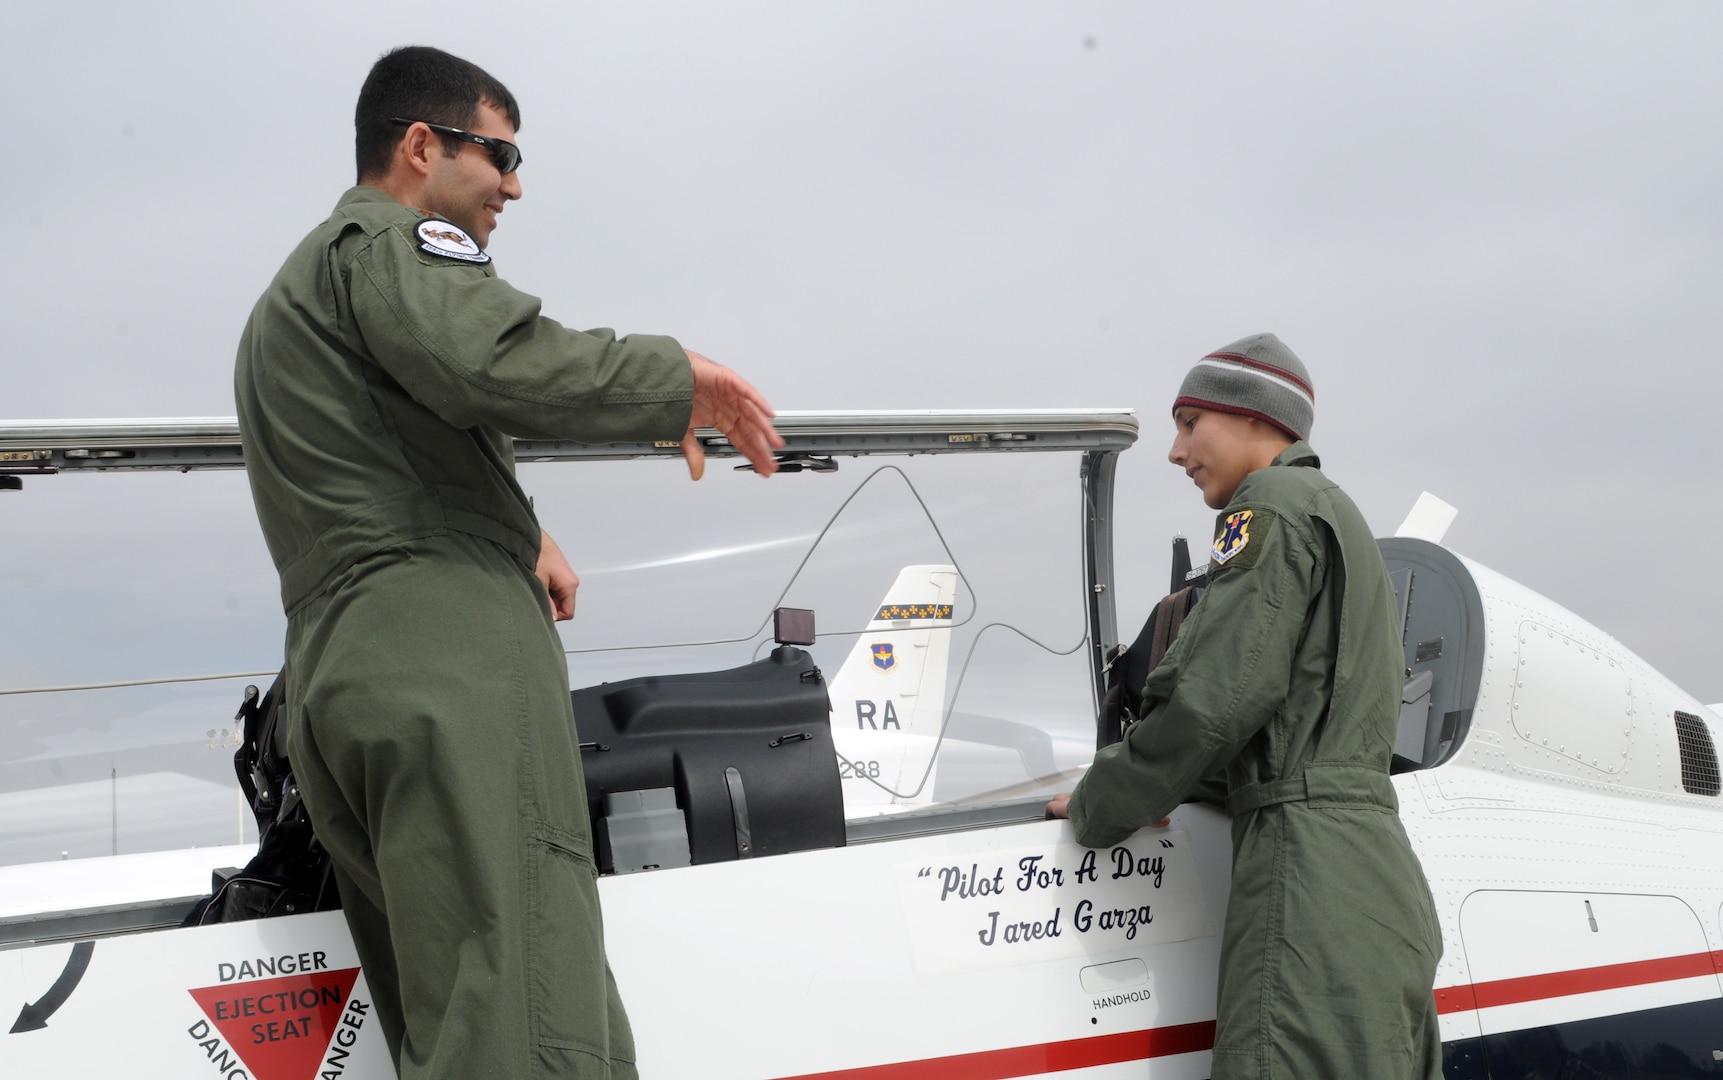 Capt. Bill Cook, 559th Flying Training Squadron executive officer, introduces Jared Garza to a T-6 during Pilot for a Day on Feb. 27. (U.S. Air Force photo by Steve White)